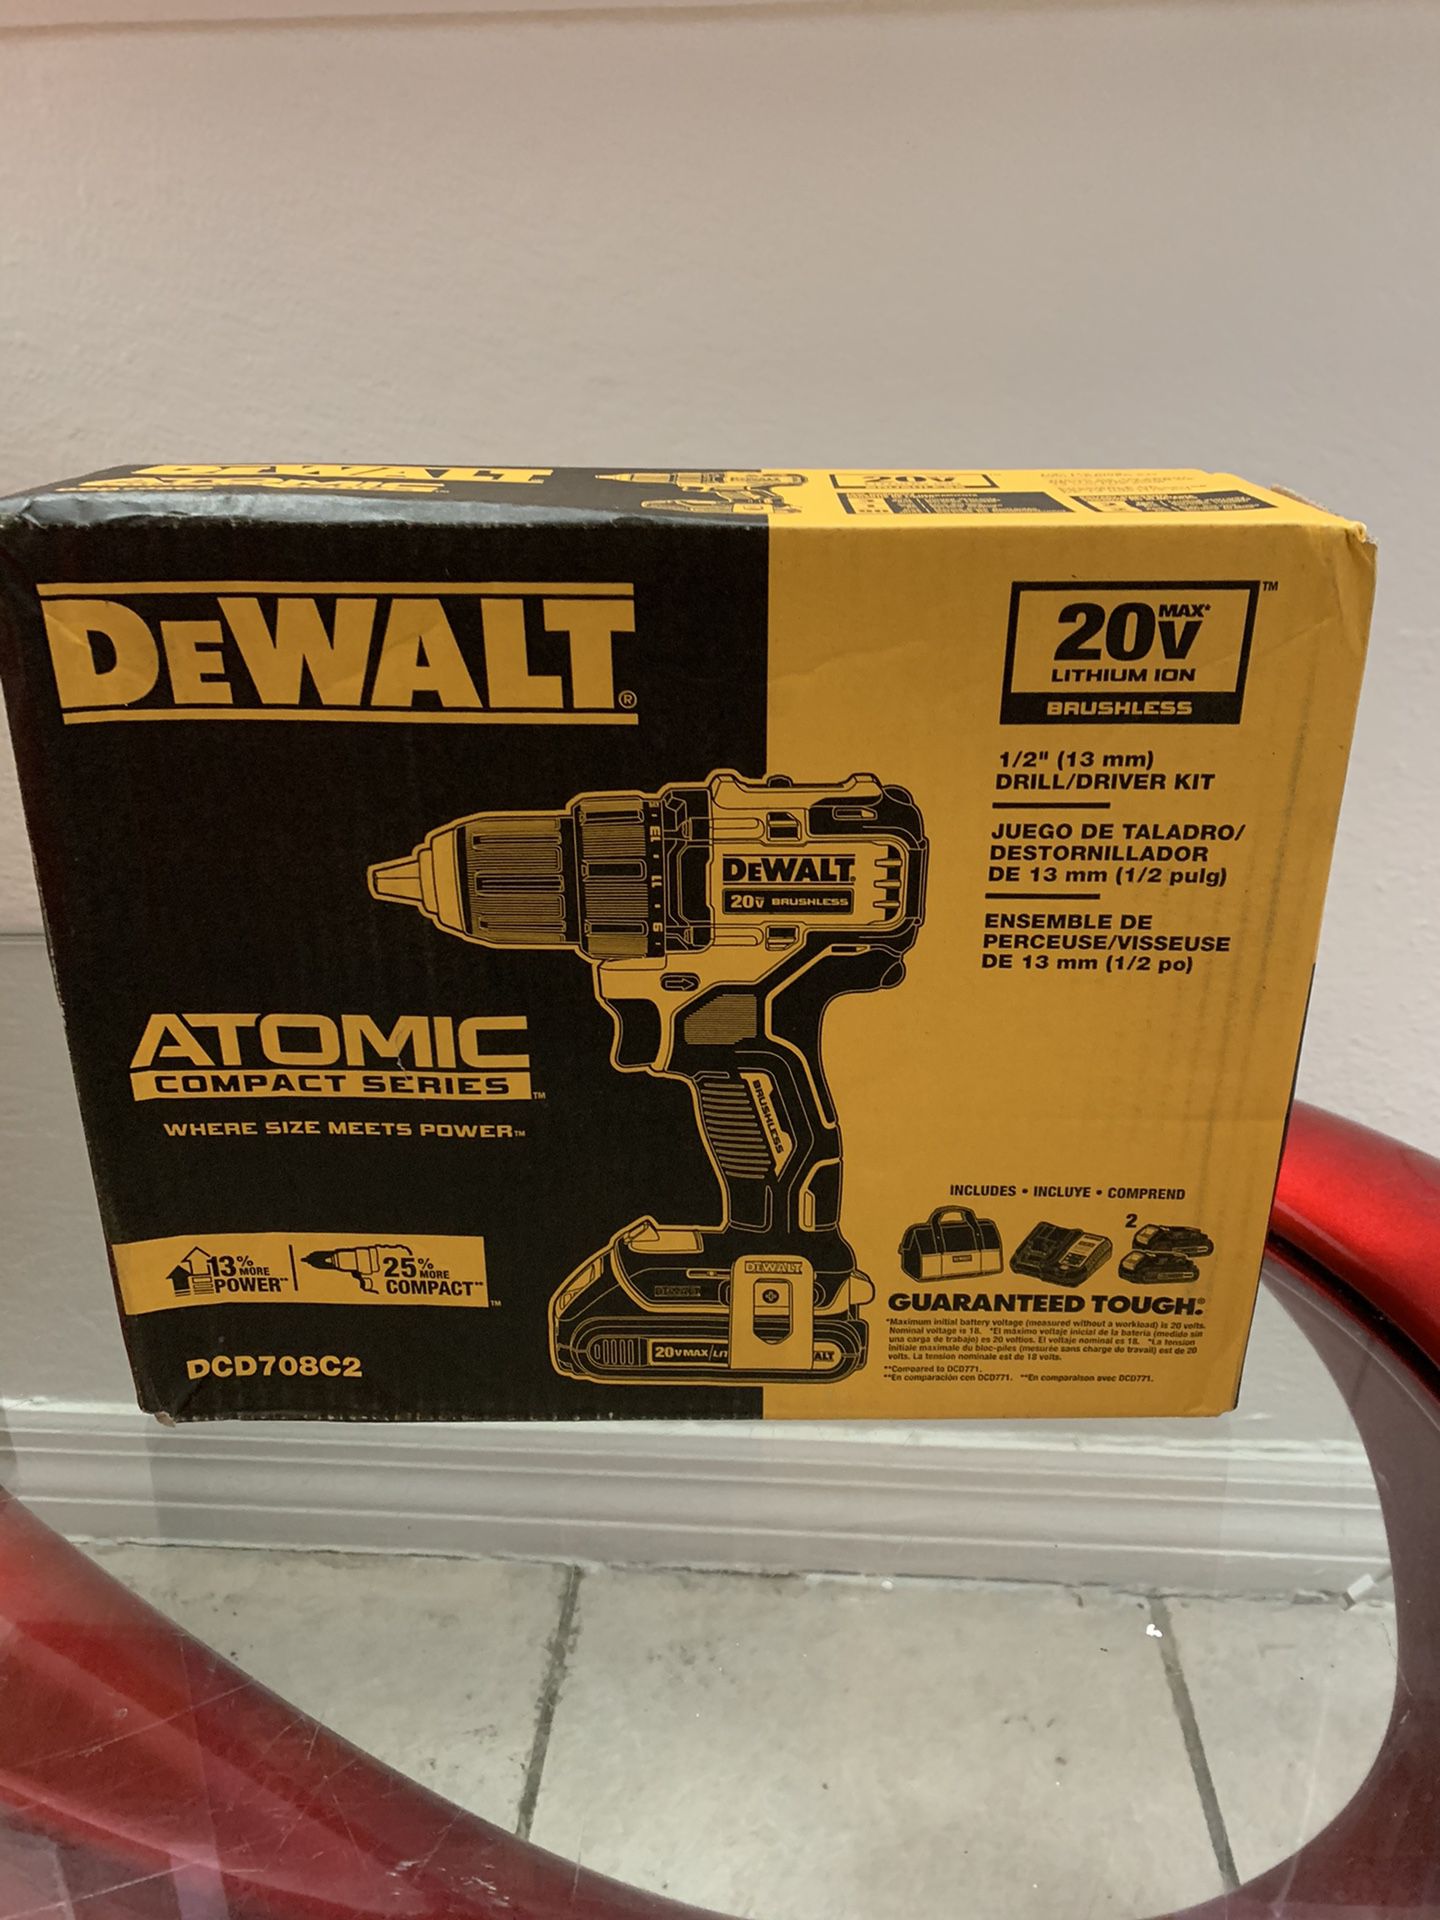 DEWALT DCD708C2 Atomic 20V Max Lithium-Ion Brushless Cordless Compact 1/2 Inch Drill Driver Kit